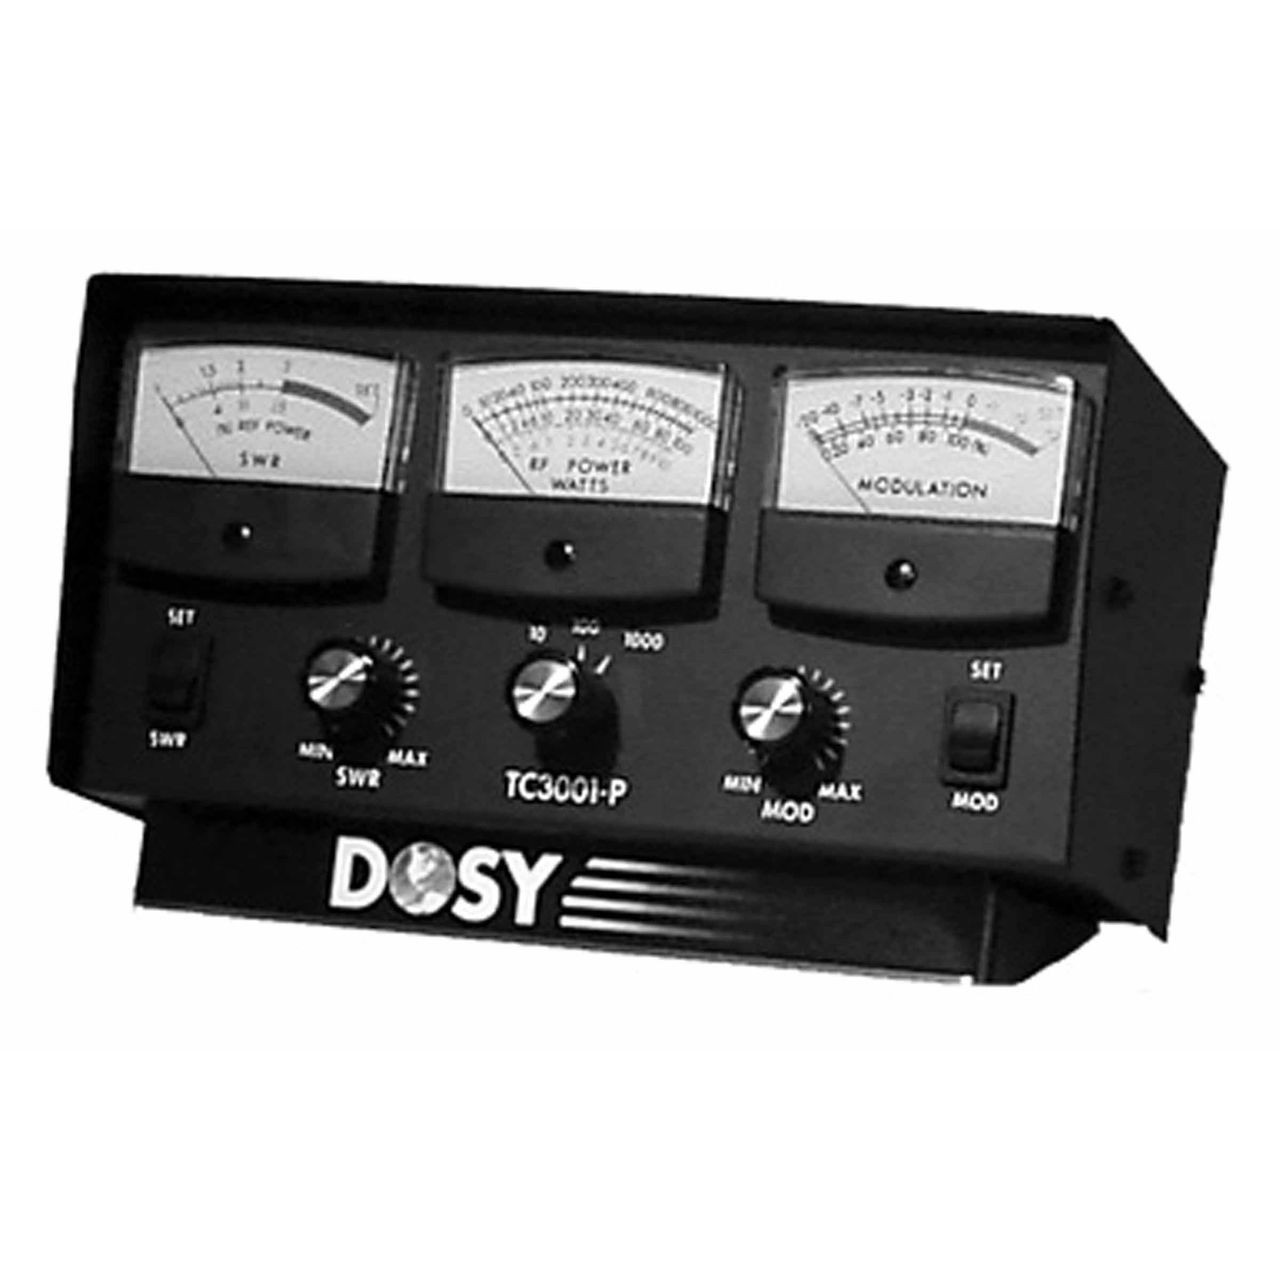 Dosy TC-3001-P TEST SET FOR 10/100/1000 WATT,SWR,% MOD,3 - OUT OF STOCK